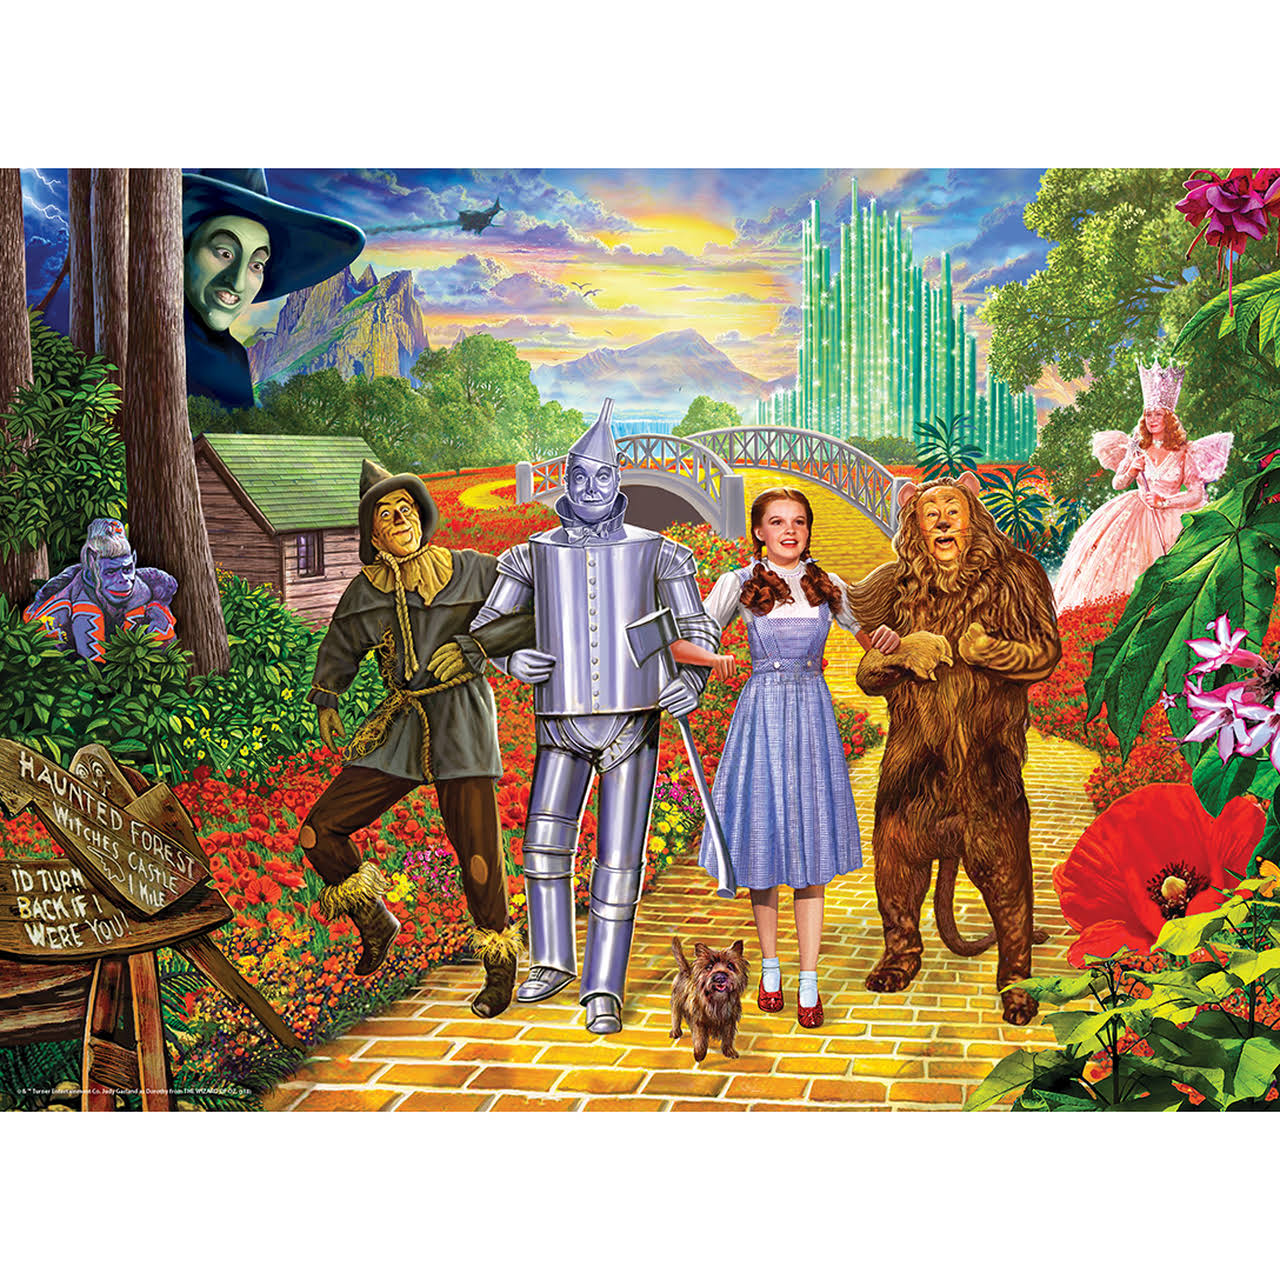 The Wizard of Oz Glitter Shimmer Foil Puzzles - 100pcs